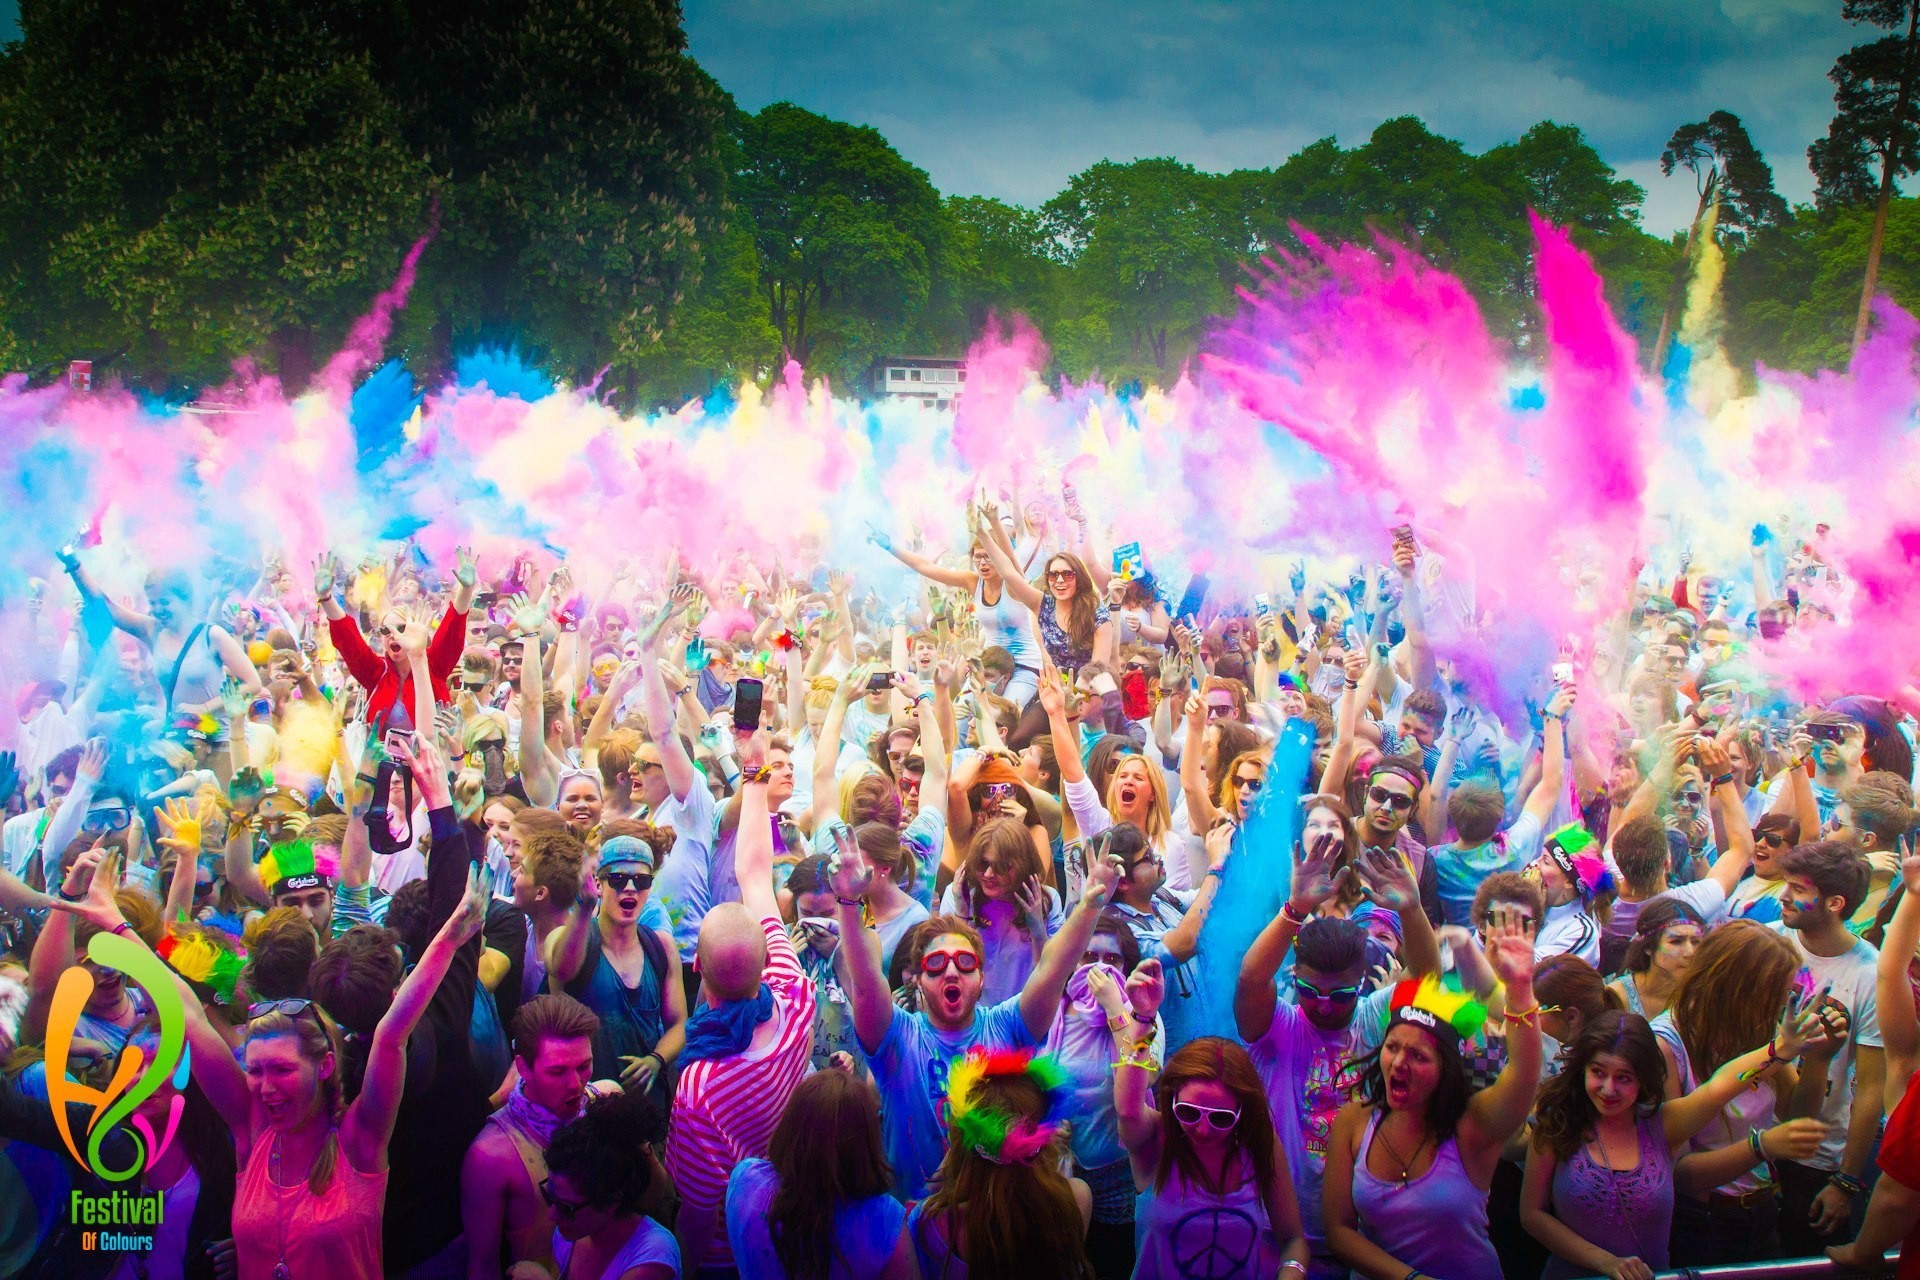 1920x1280 Peoples Celebrating Holi Festival of Colors Wallpapers